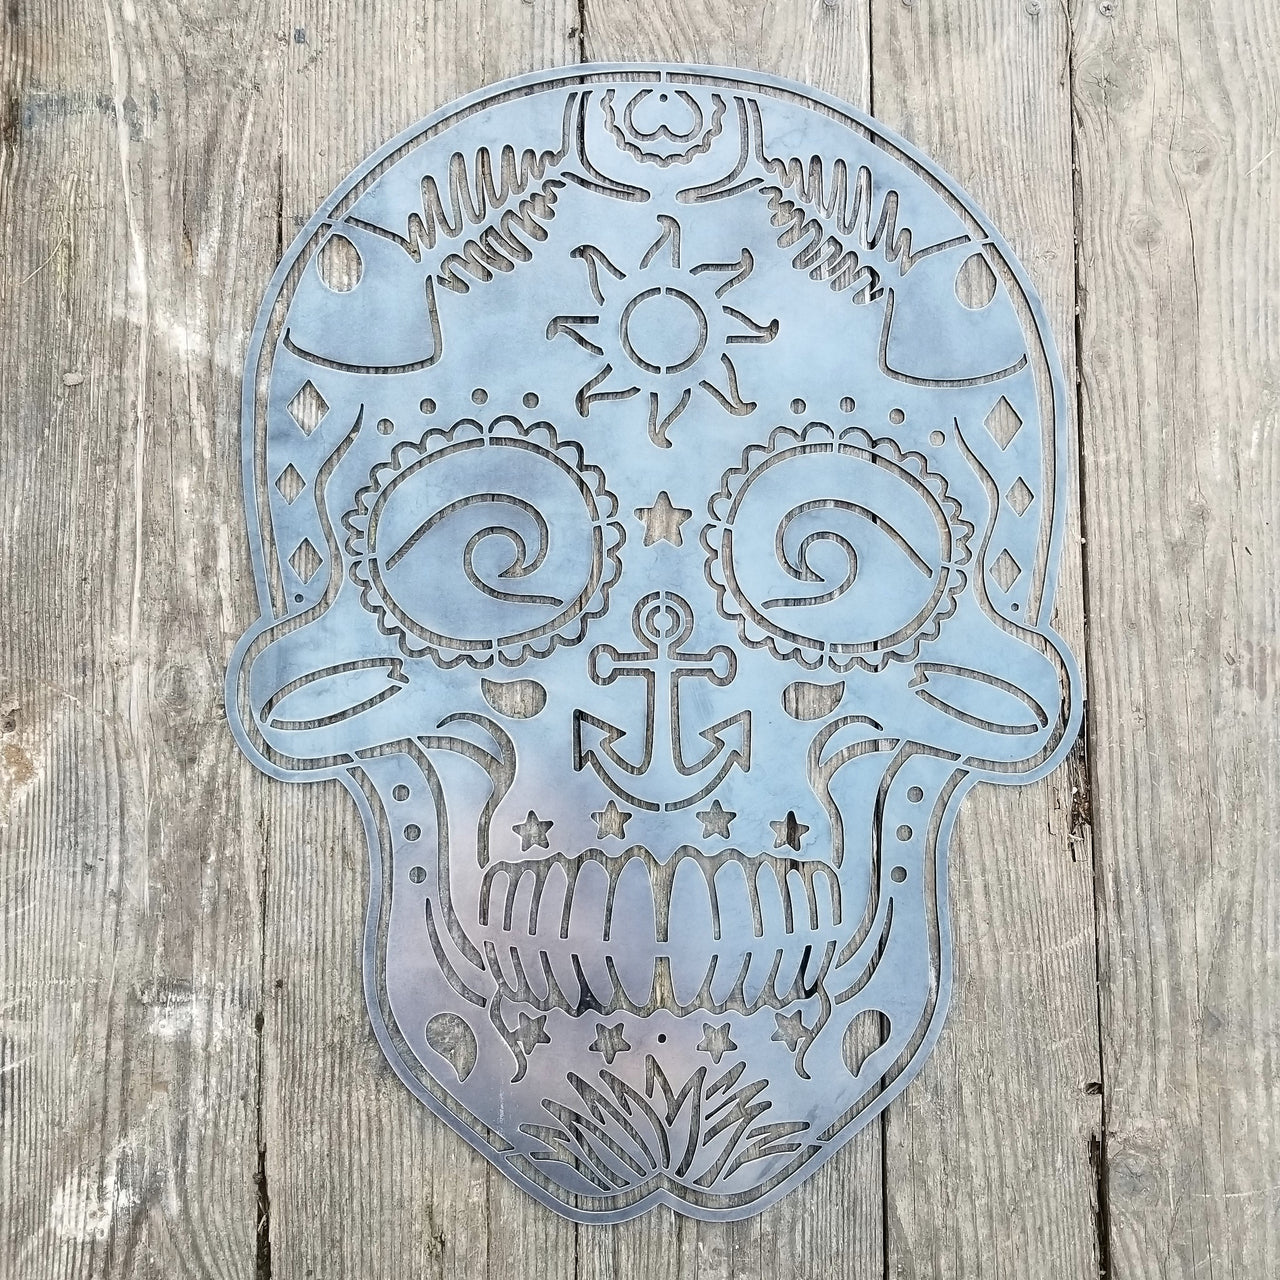 This sign is in the shape of a sugar skull. It is water themed with waves, fish bones, anchors and more.